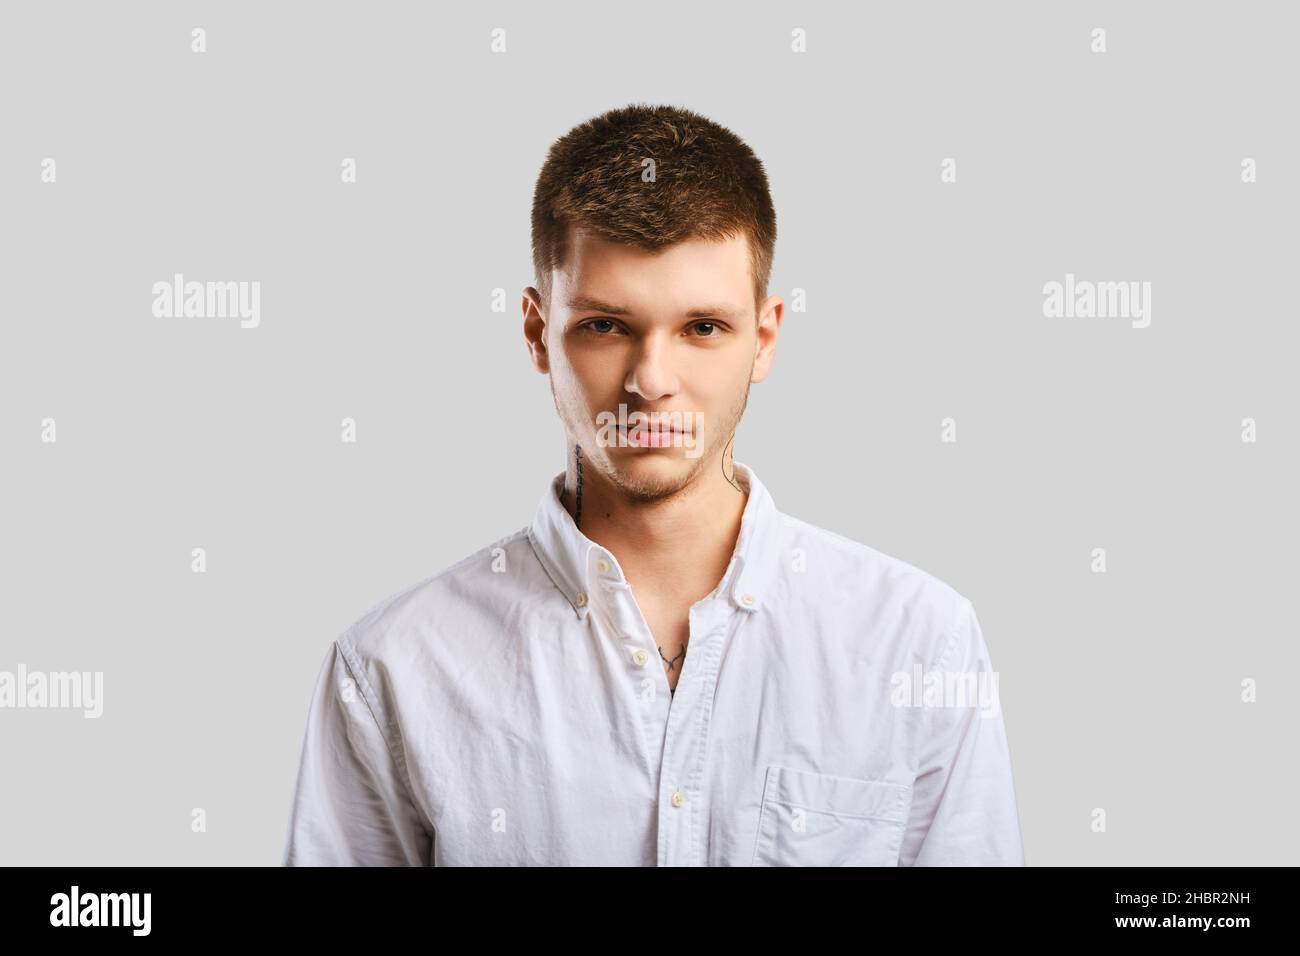 Young handsome man in white shirt posing over grey background Stock Photo